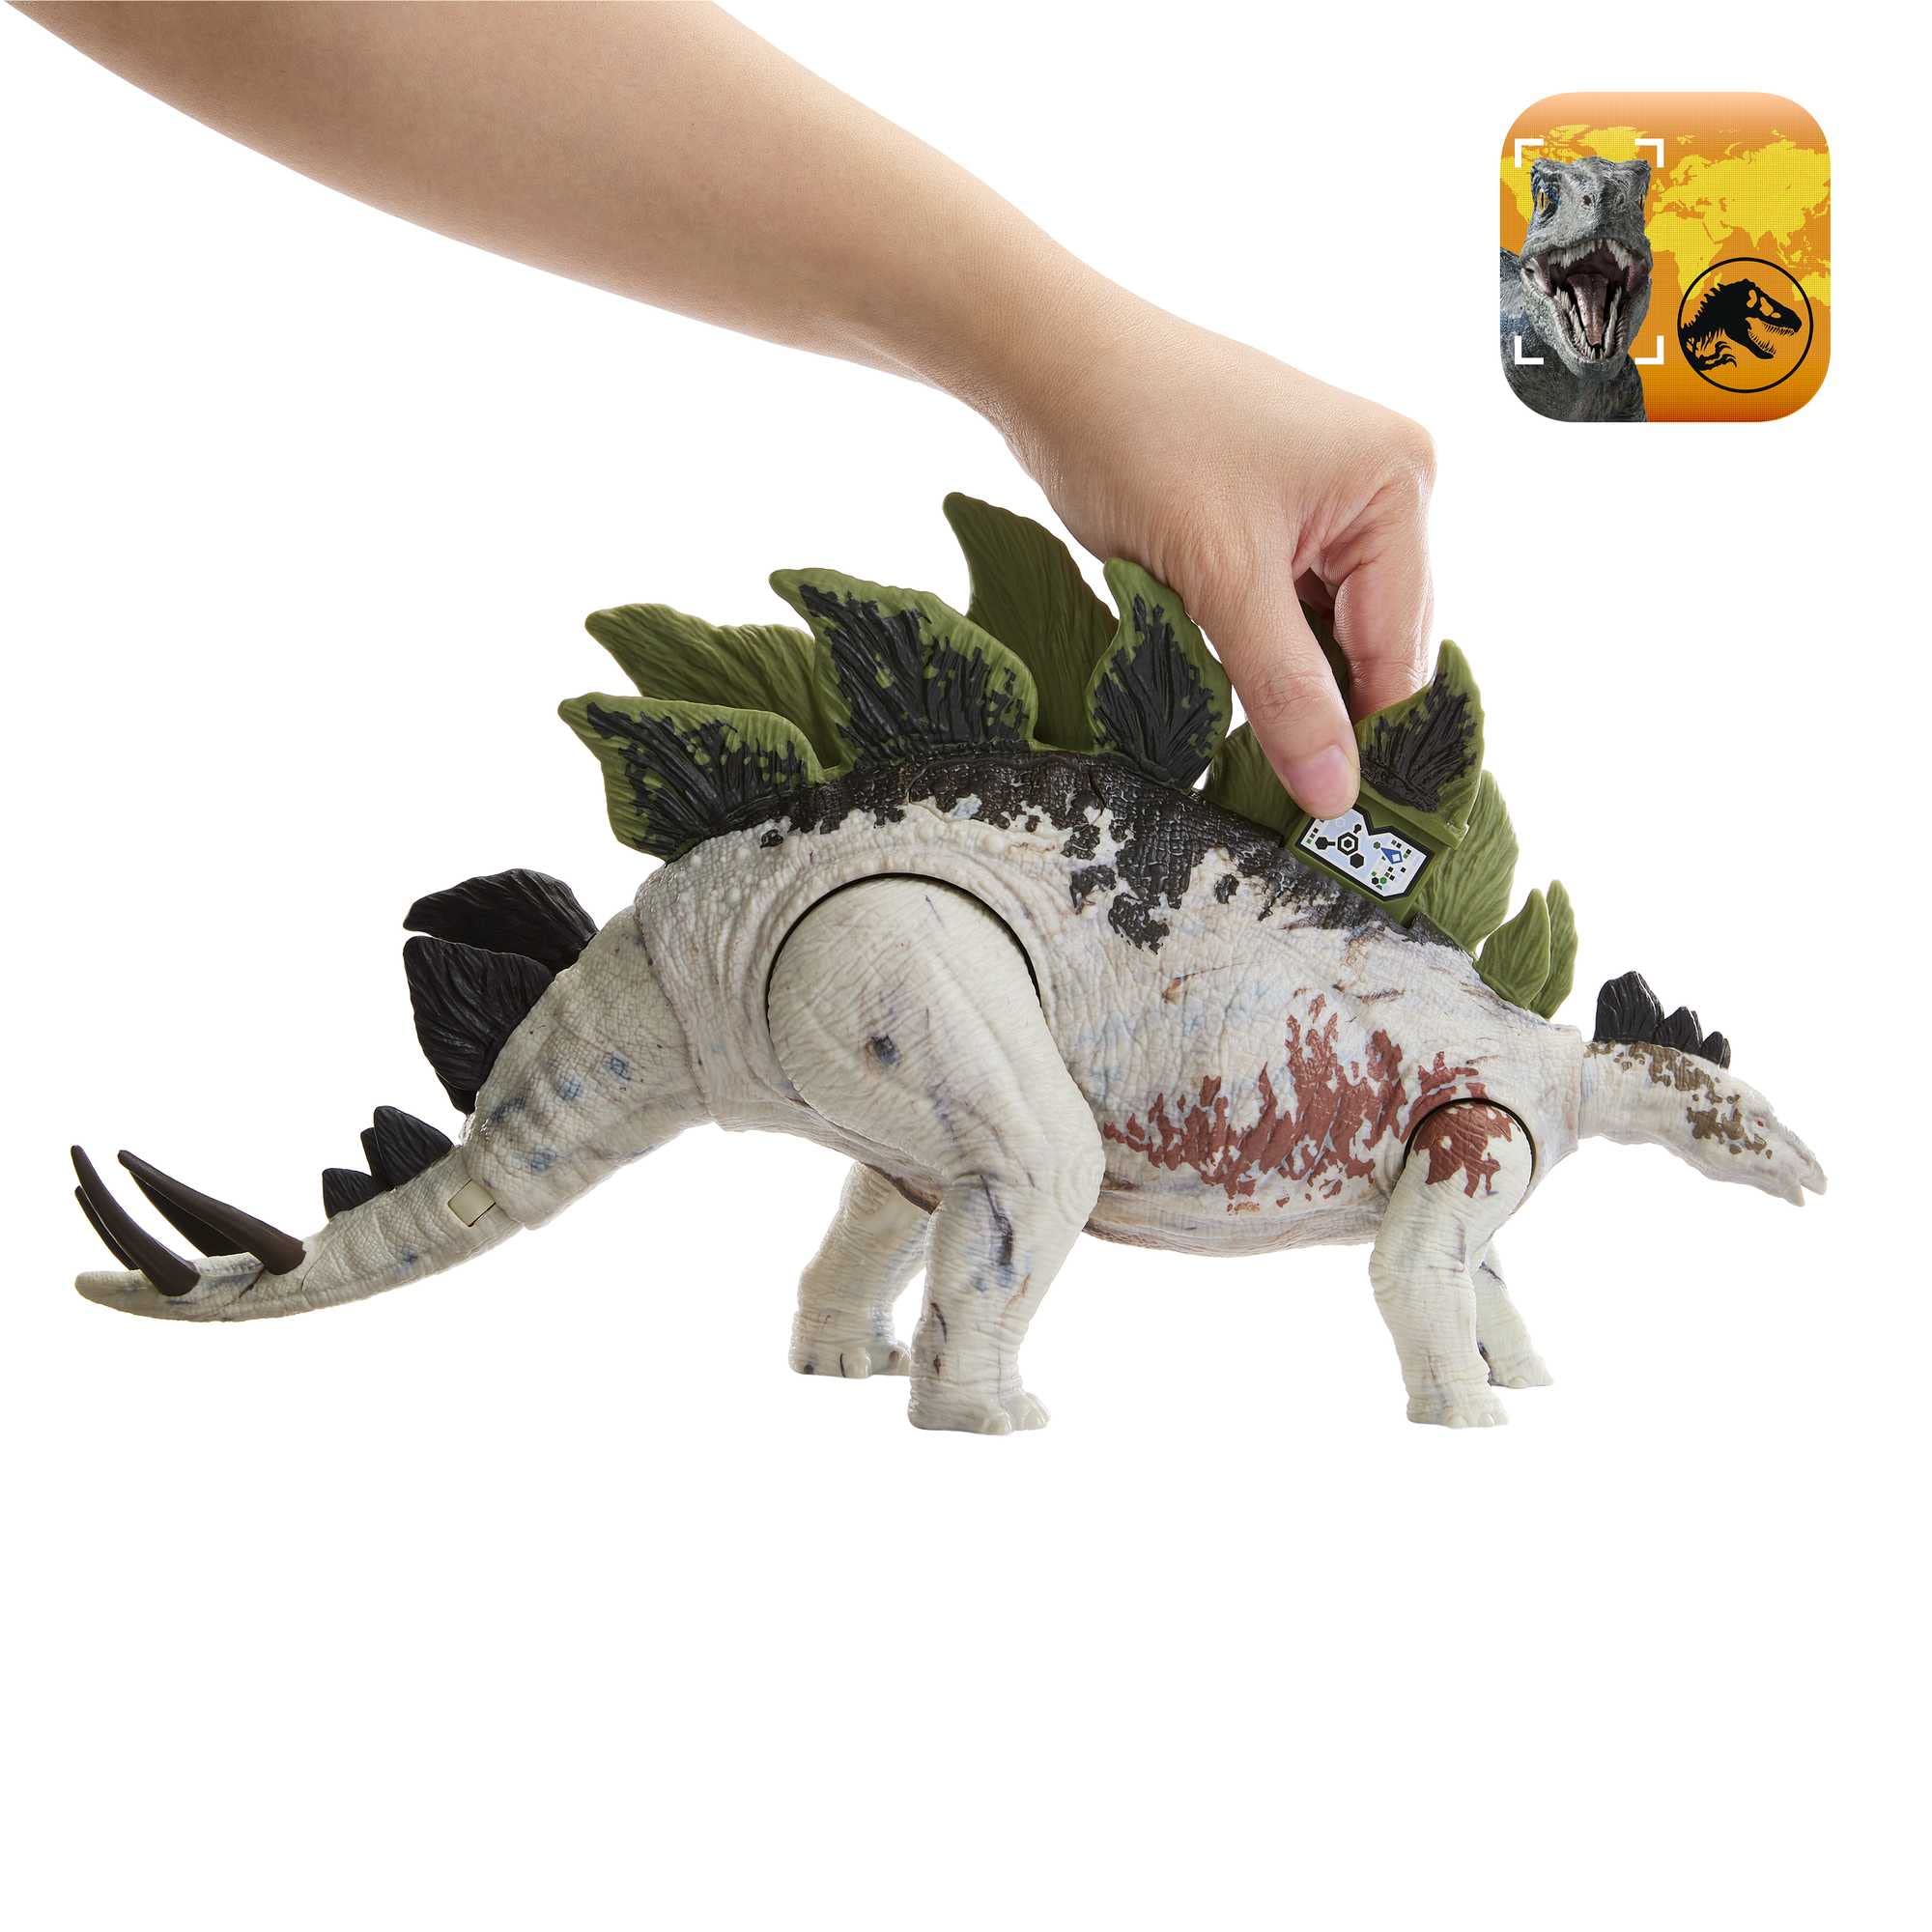 Jurassic World Dominion Gigantic Trackers Stegosaurus Action Figure Toy with Attack Motion & Tracking Gear, Plus Downloadable App & Ar